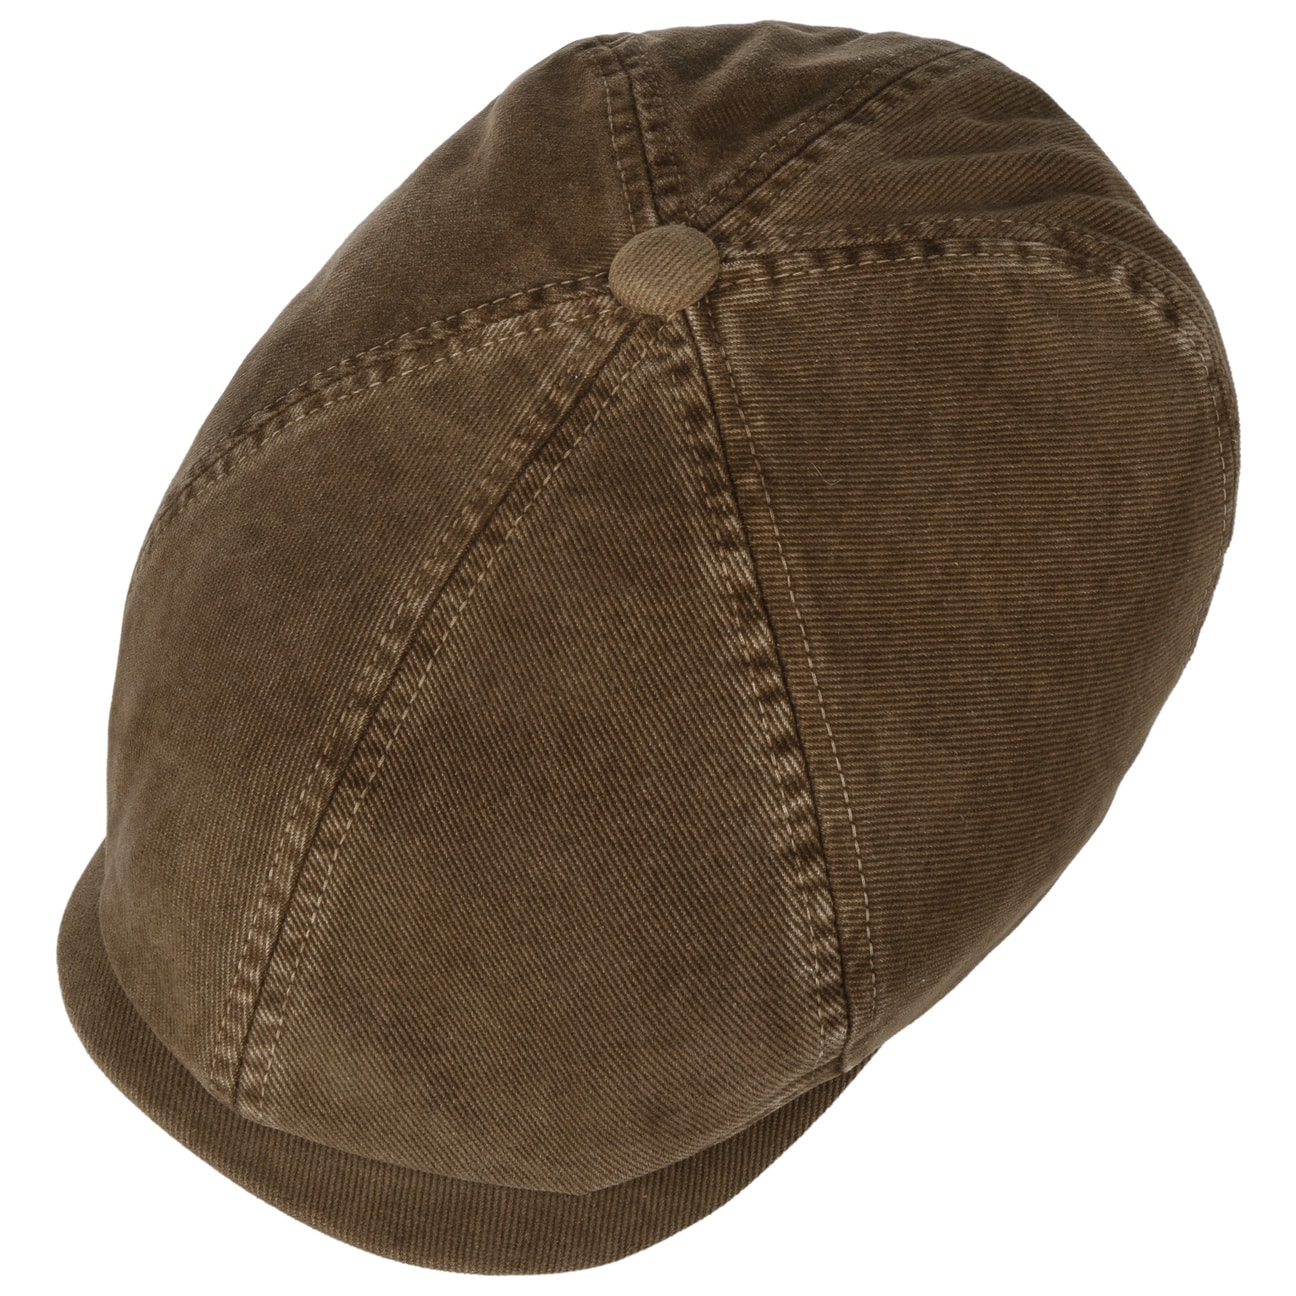 Rusty 6 panel flat cap dedicated for summer. Sewn with cotton cloth.